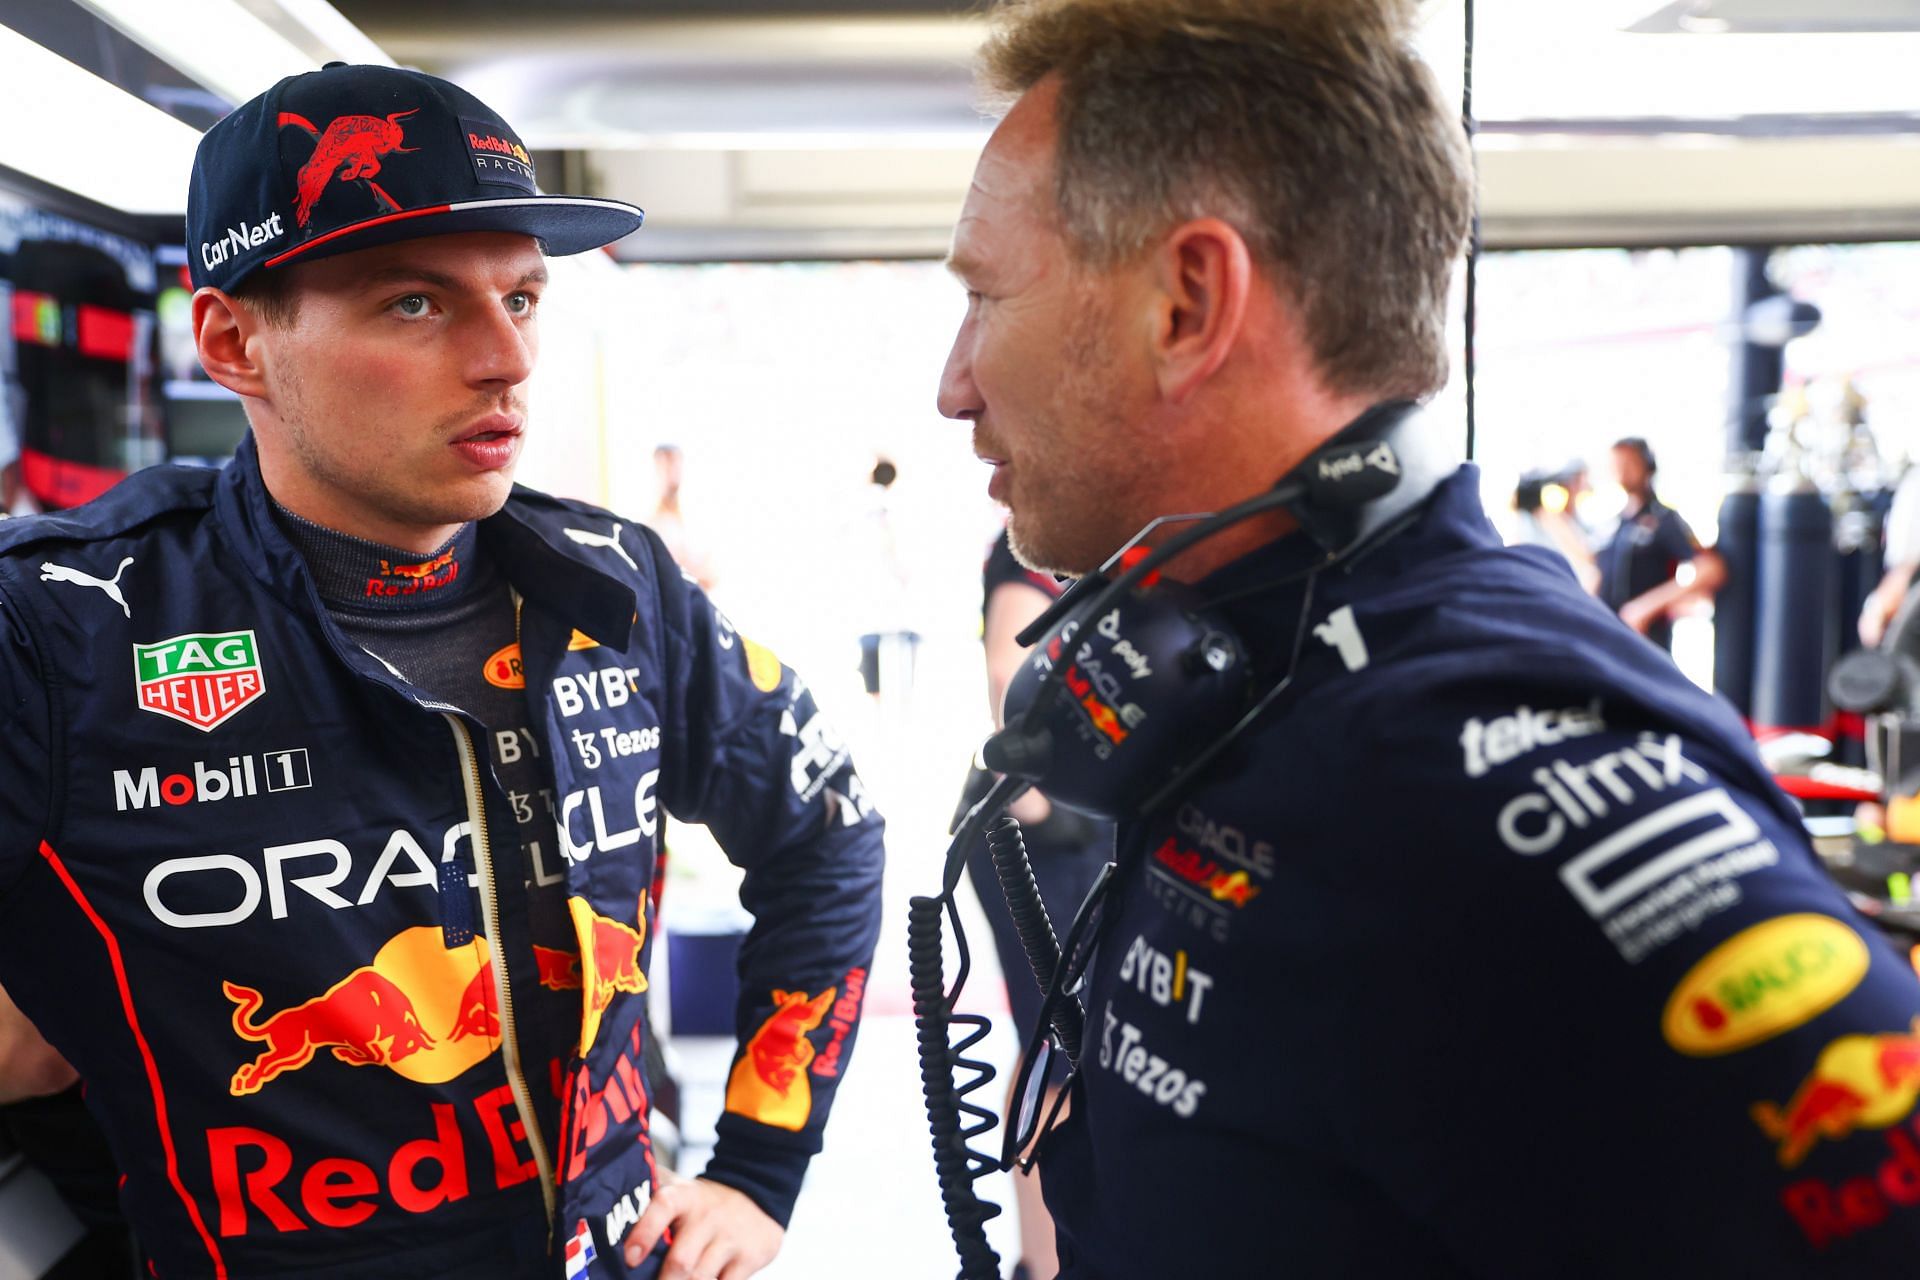 Max Verstappen (left) and Christian Horner (right) at the F1 Grand Prix of Spain - Practice